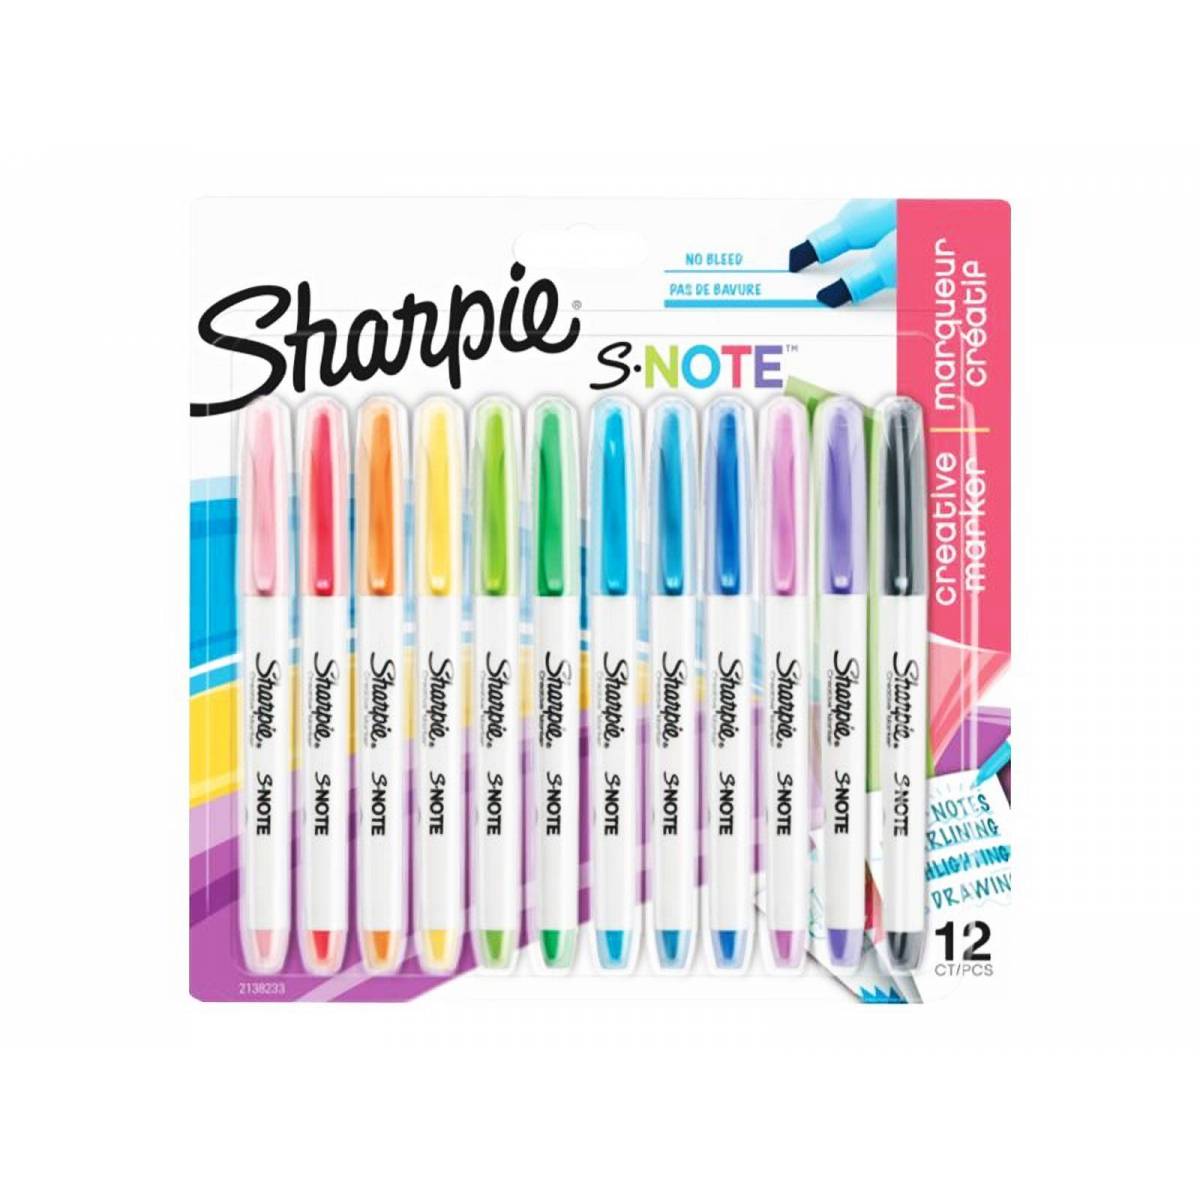 https://www.maxxidiscount.com/28393-large_default/set-of-12-creative-markers-with-sharpie-snote-2in1-tip.jpg